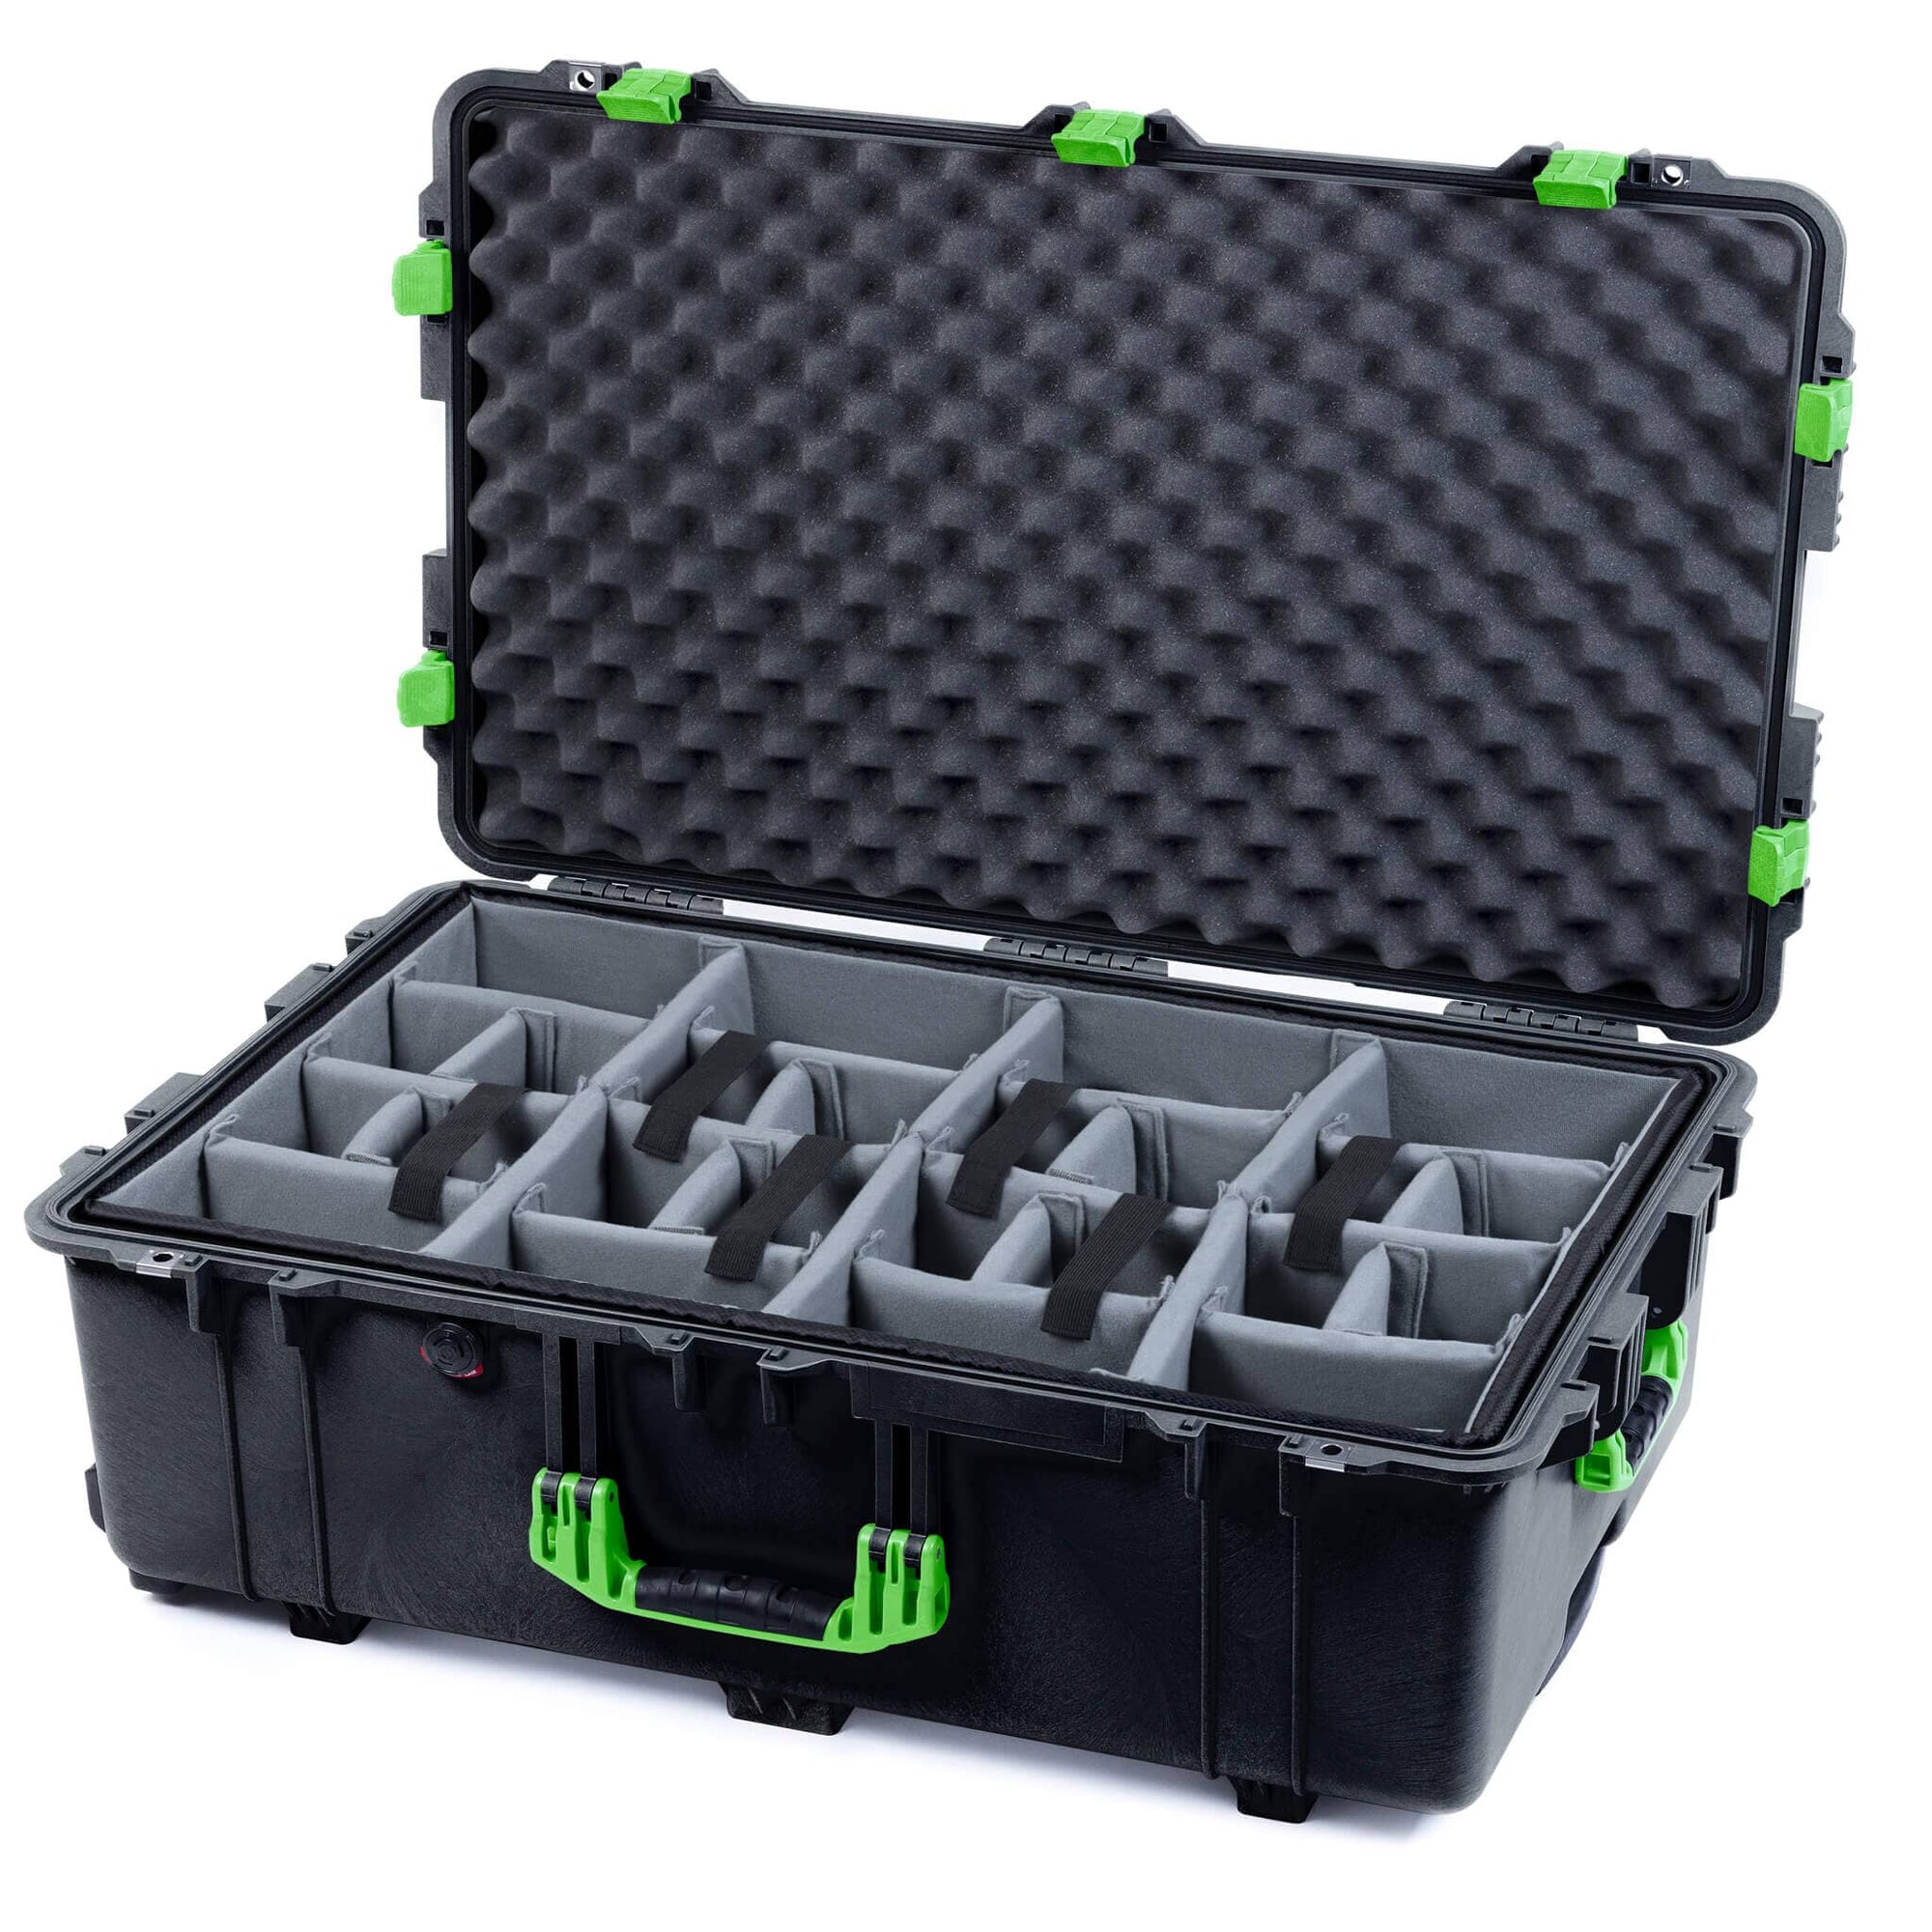 Black & Lime Green Pelican 1650 Case - Double-Throw Latches